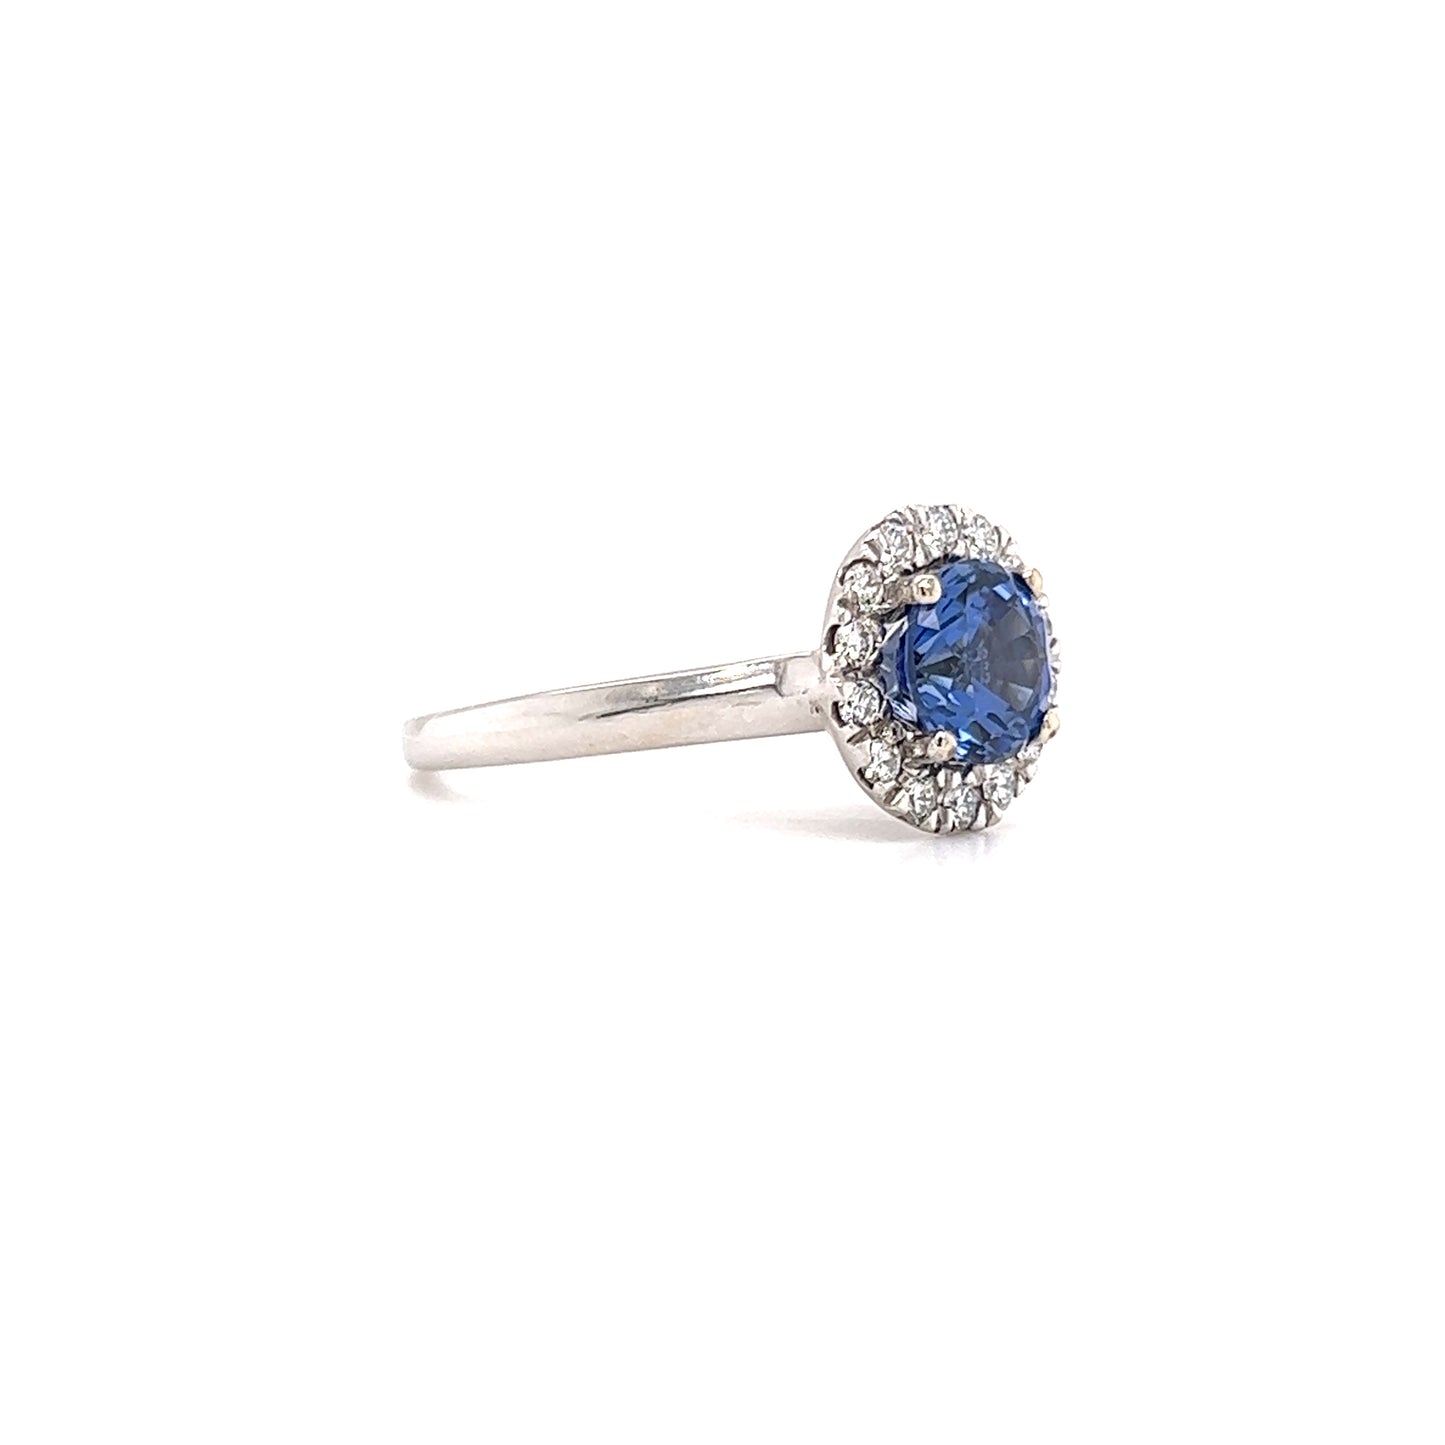 Round Sapphire Ring with Diamond Halo in 14K White Gold Left Side View